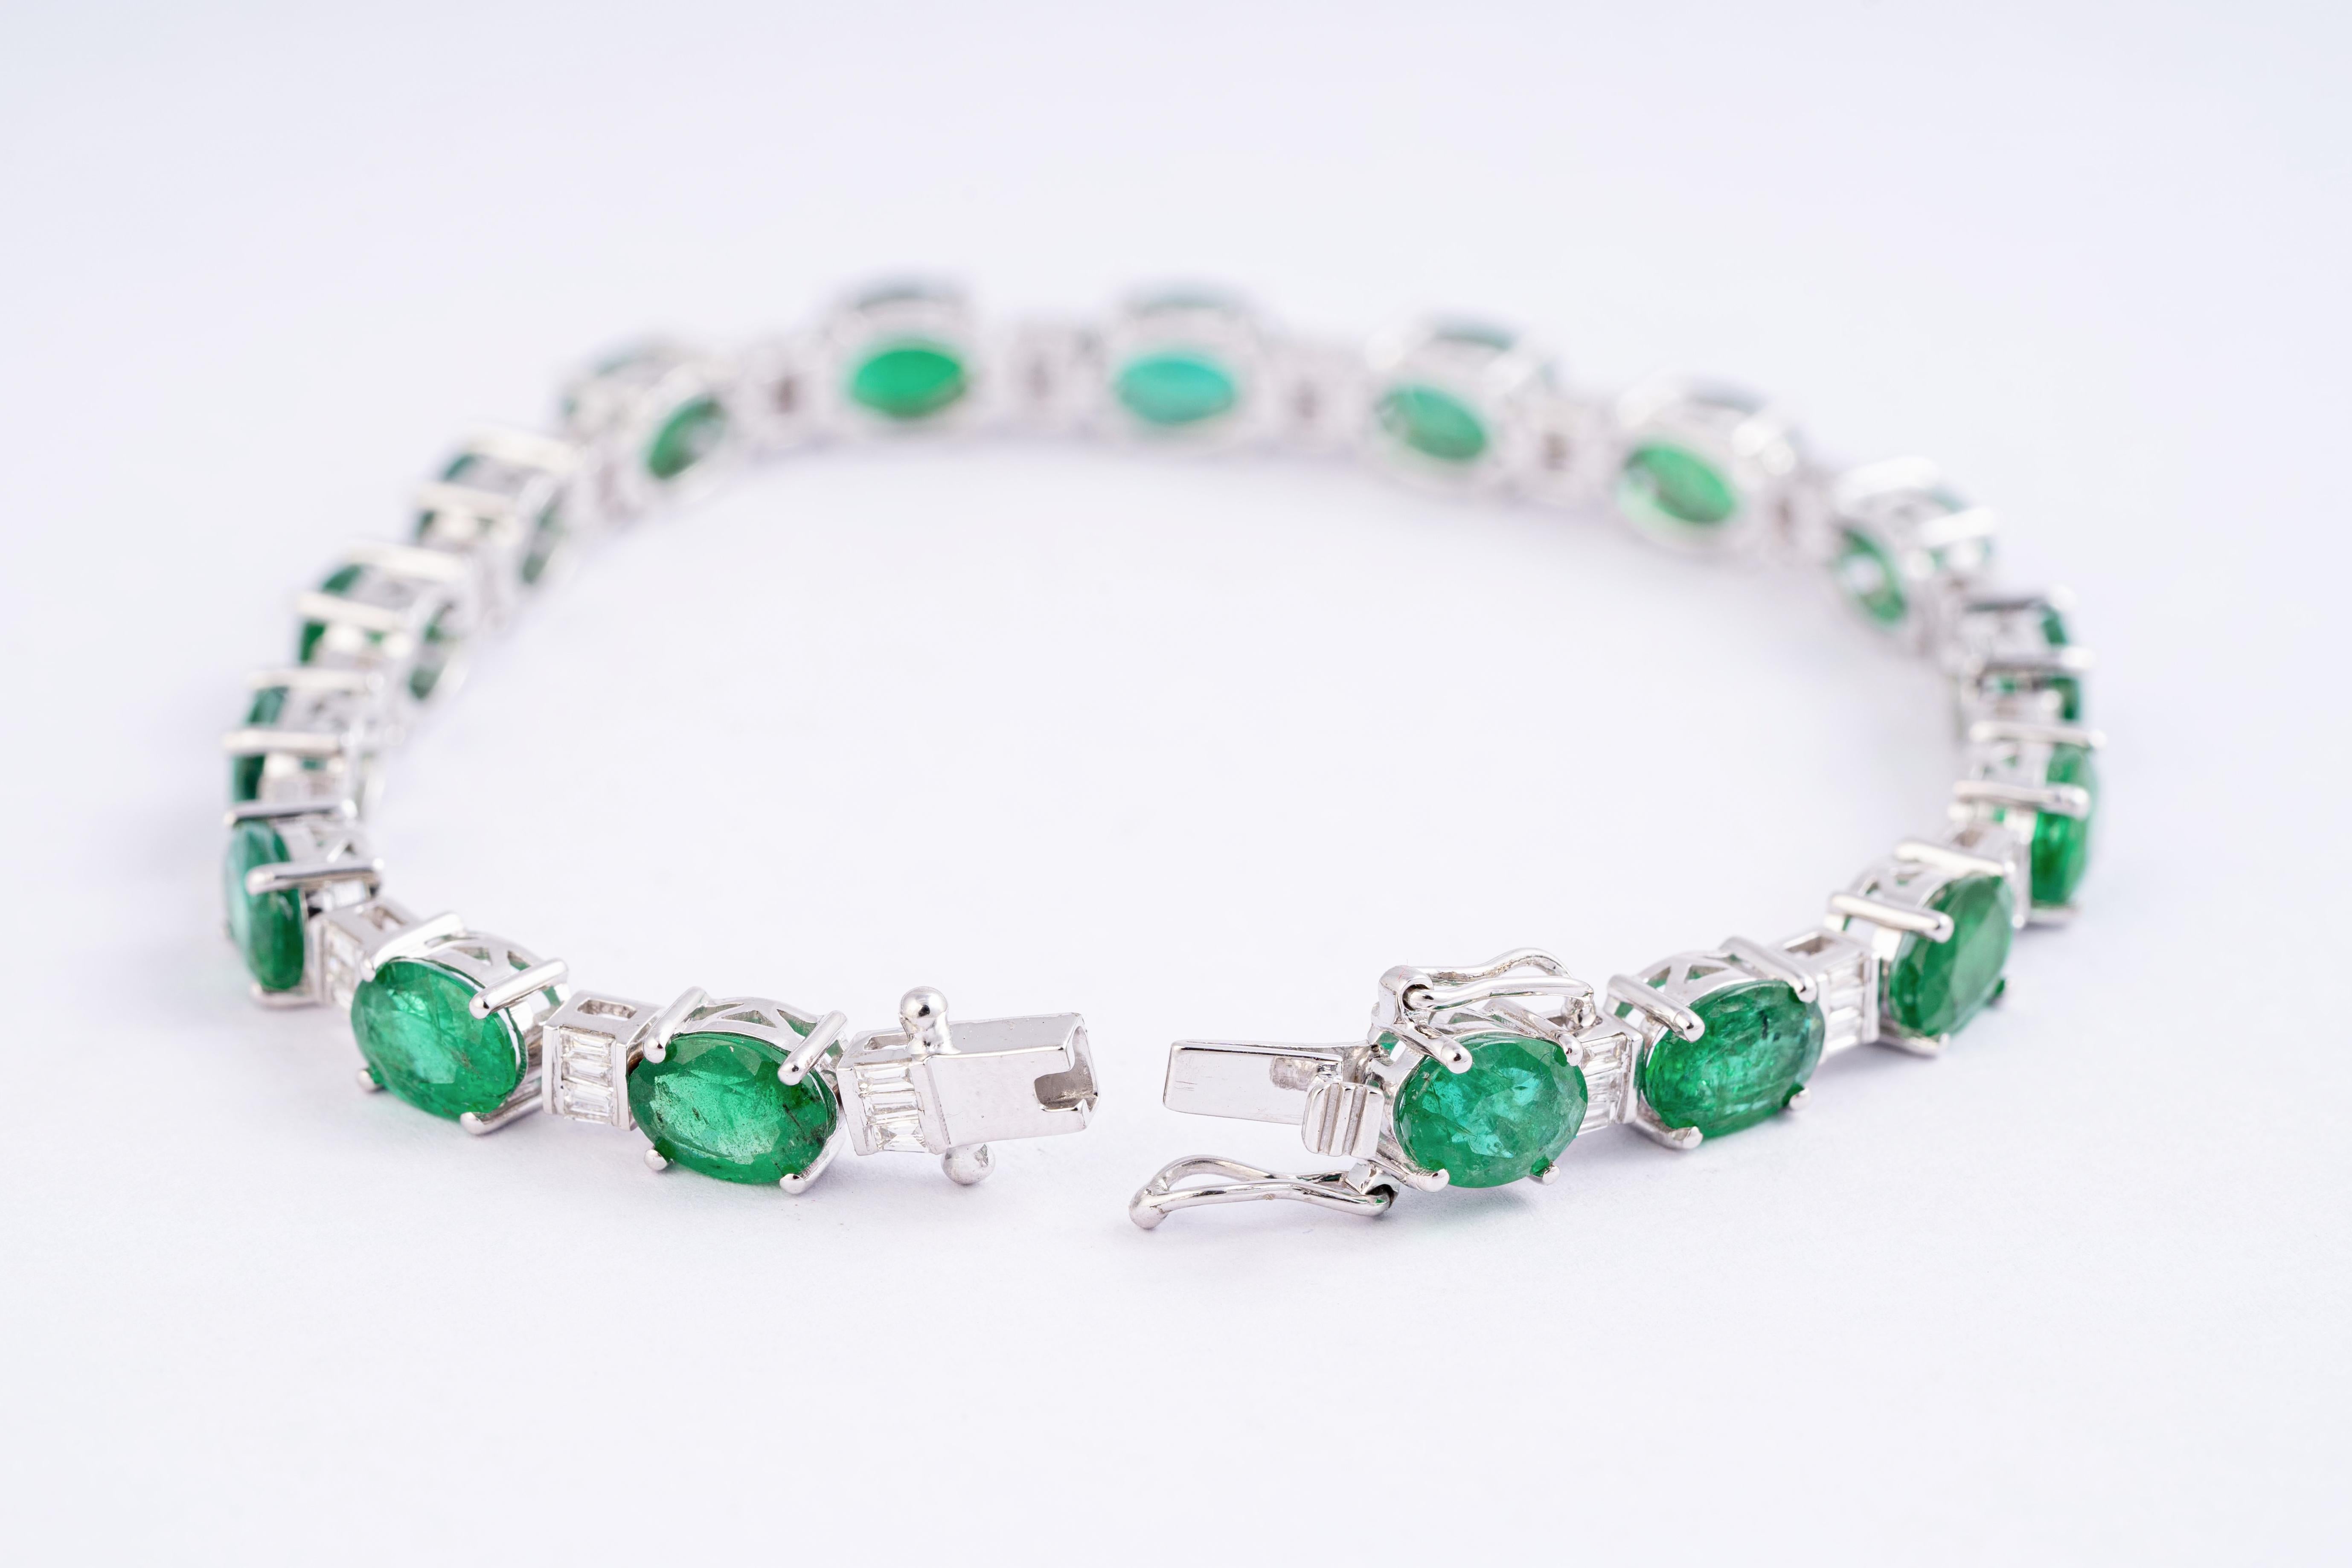 This is a stunning natural Zambian tennis bracelet with diamonds emerald is of very good quality
and so are diamonds which are vsi clarity and G colour
emeralds :13.06cts
diamonds : 0.74cts
gold : 11.290gms                   
very hard to capture